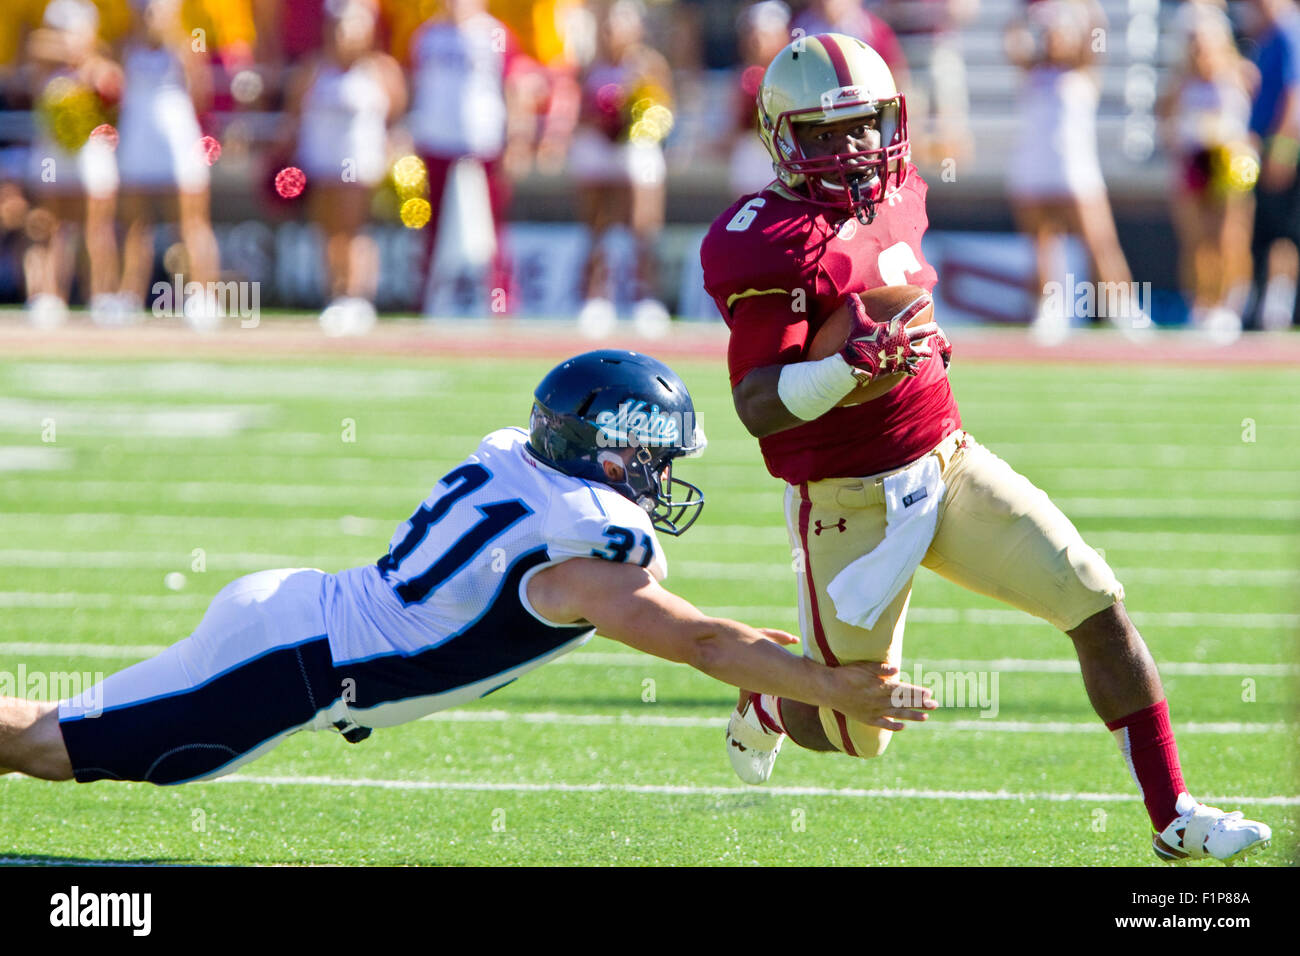 Chestnut Hill, MA, USA. 5th September, 2015. Maine Black Bears punter James DeMartini (31) dives to tackle Boston College Eagles wide receiver Sherman Alston (6) during the second half of the NCAA football game between the Boston College Eagles and Maine Black Bears at Alumni Stadium. Boston College defeated main 24-3. Anthony Nesmith/Cal Sport Media Stock Photo